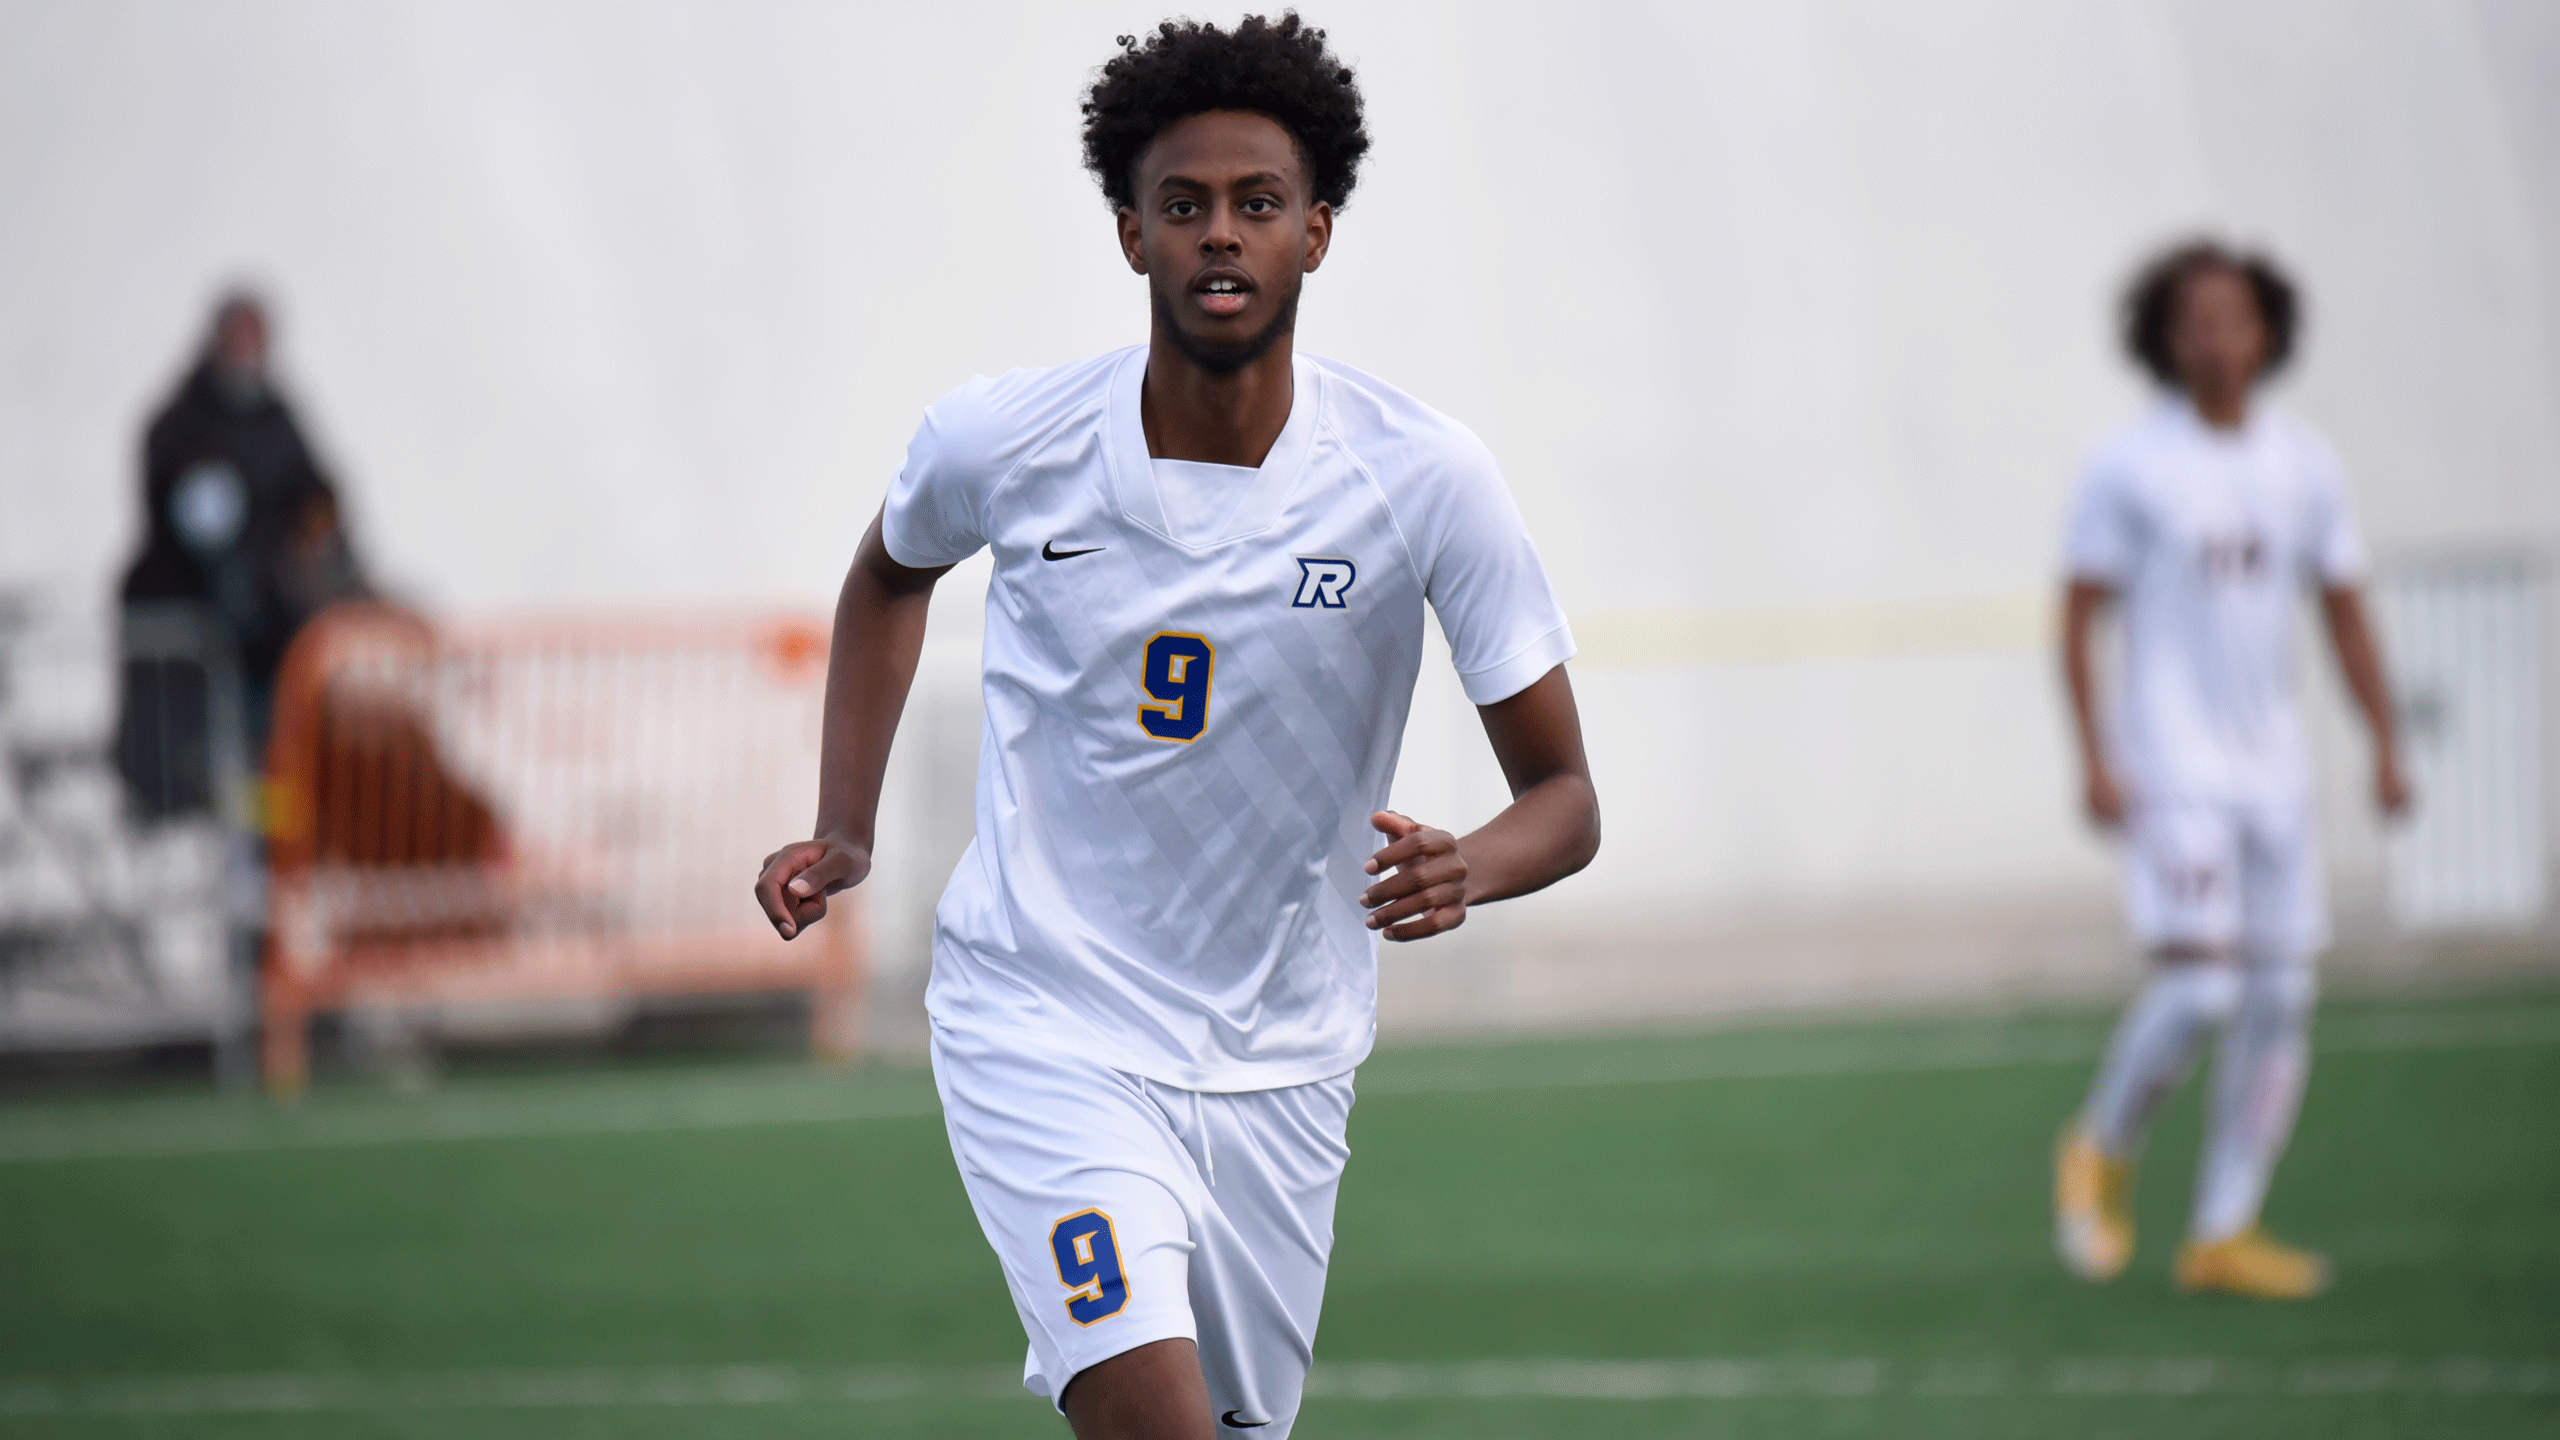 Rams men's soccer player in a white jersey